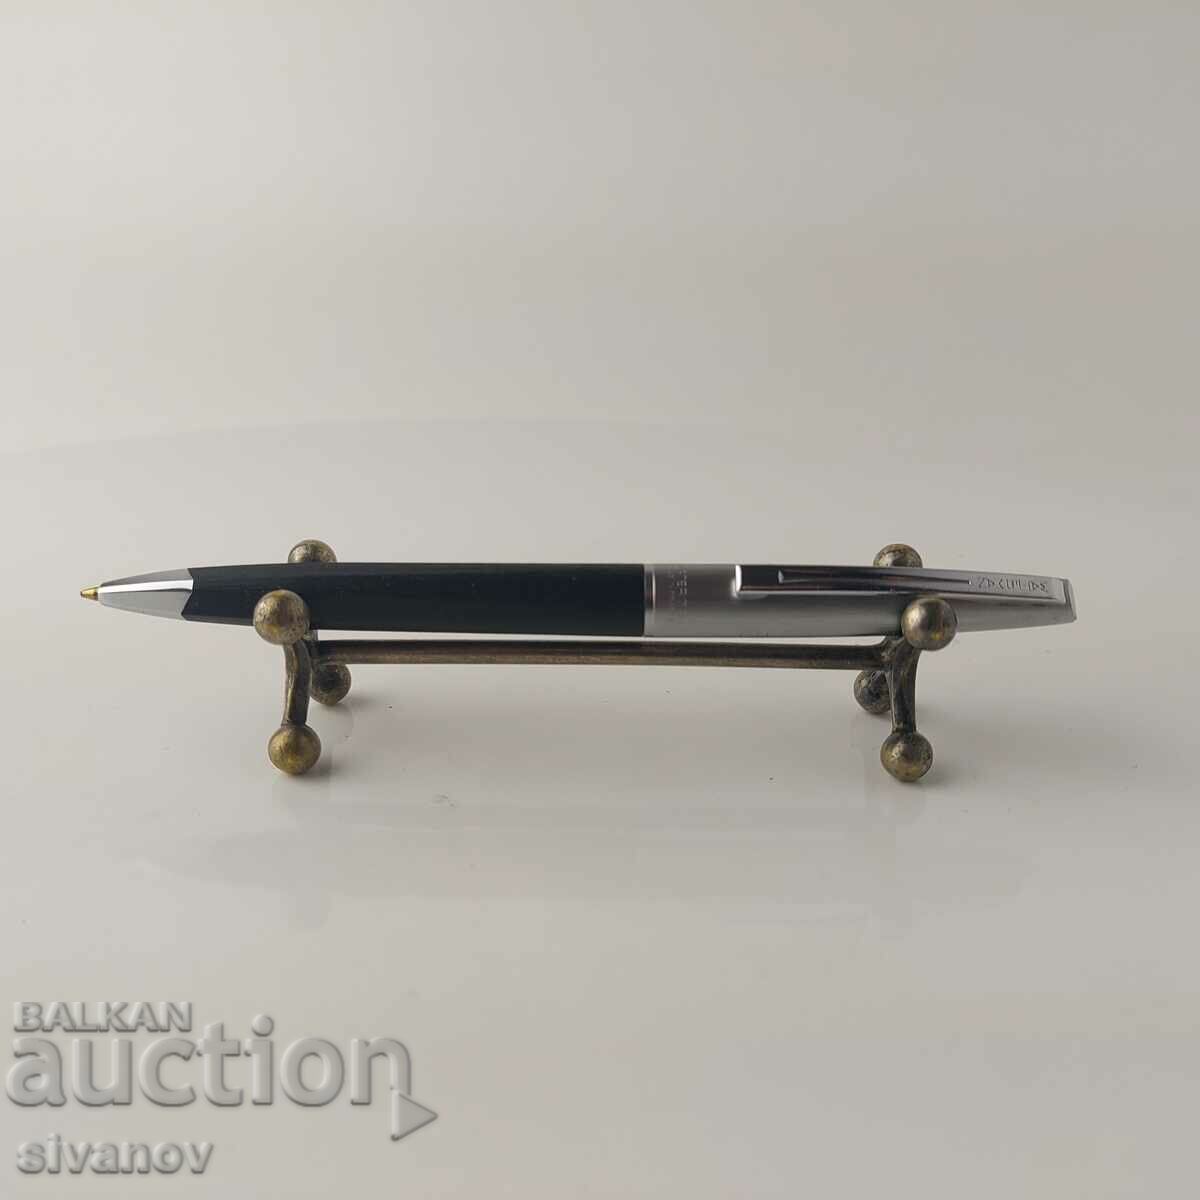 Old Waterman Concorde Made in France #5524 fountain pen